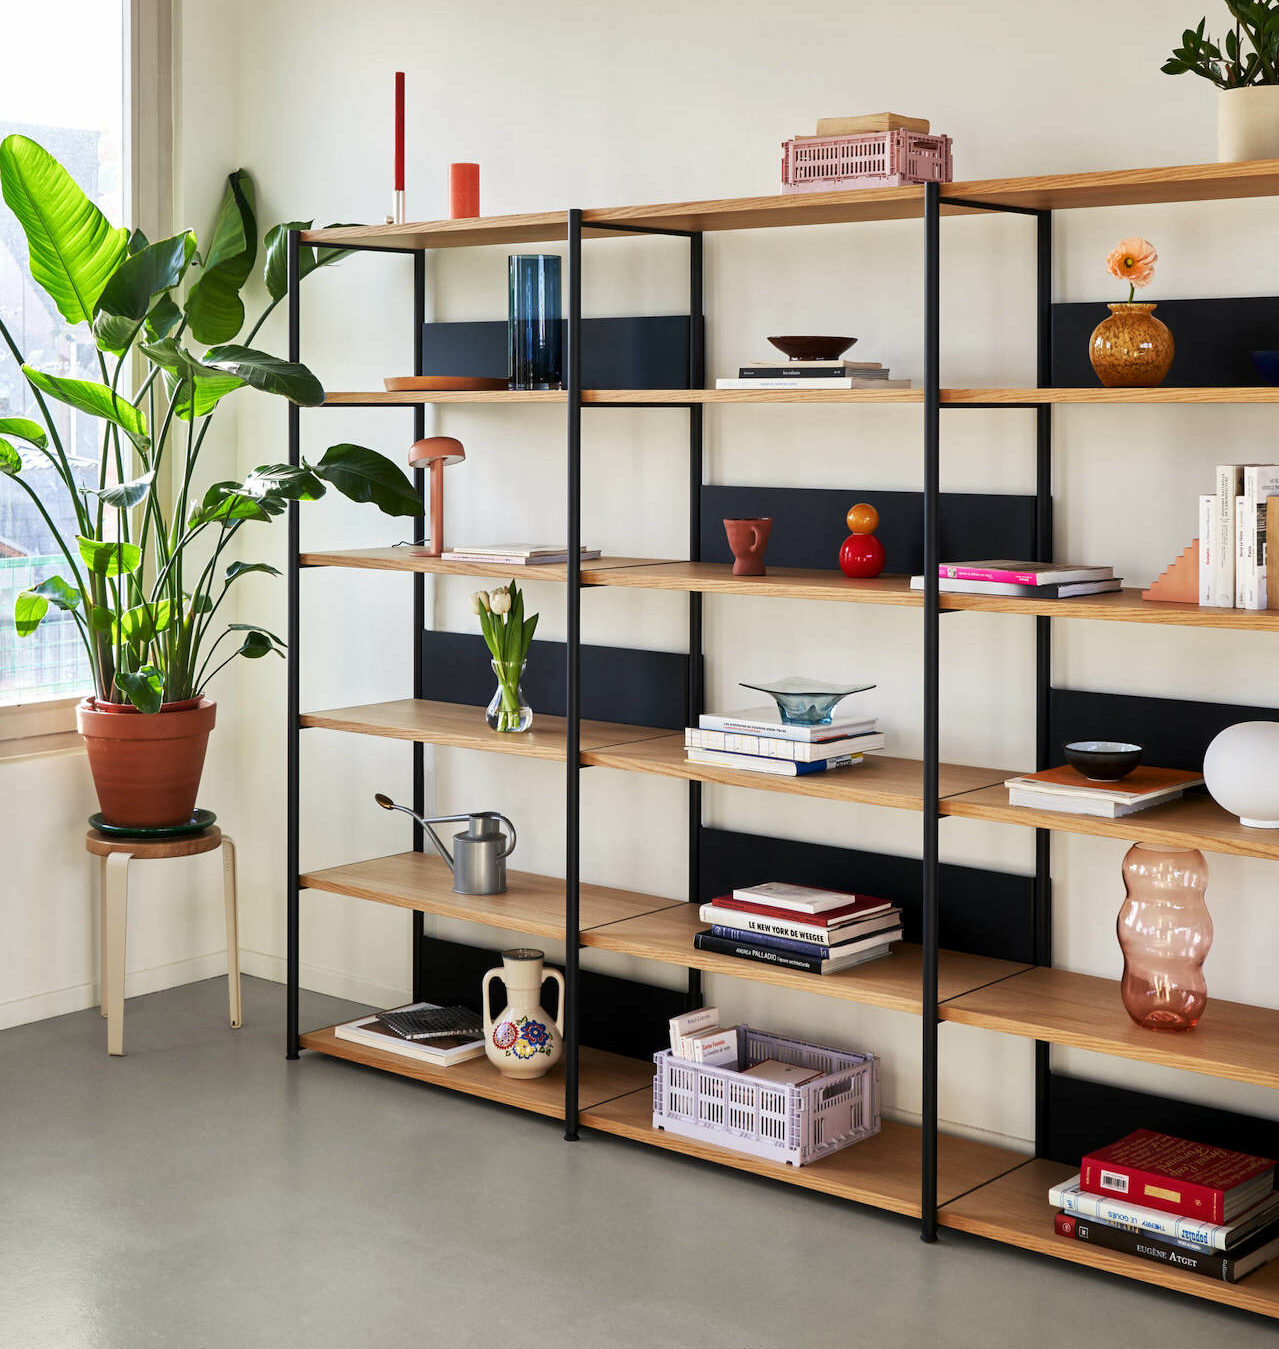 TIPTOE’s Unit System: Your Ticket to Tip-Top Home Organization